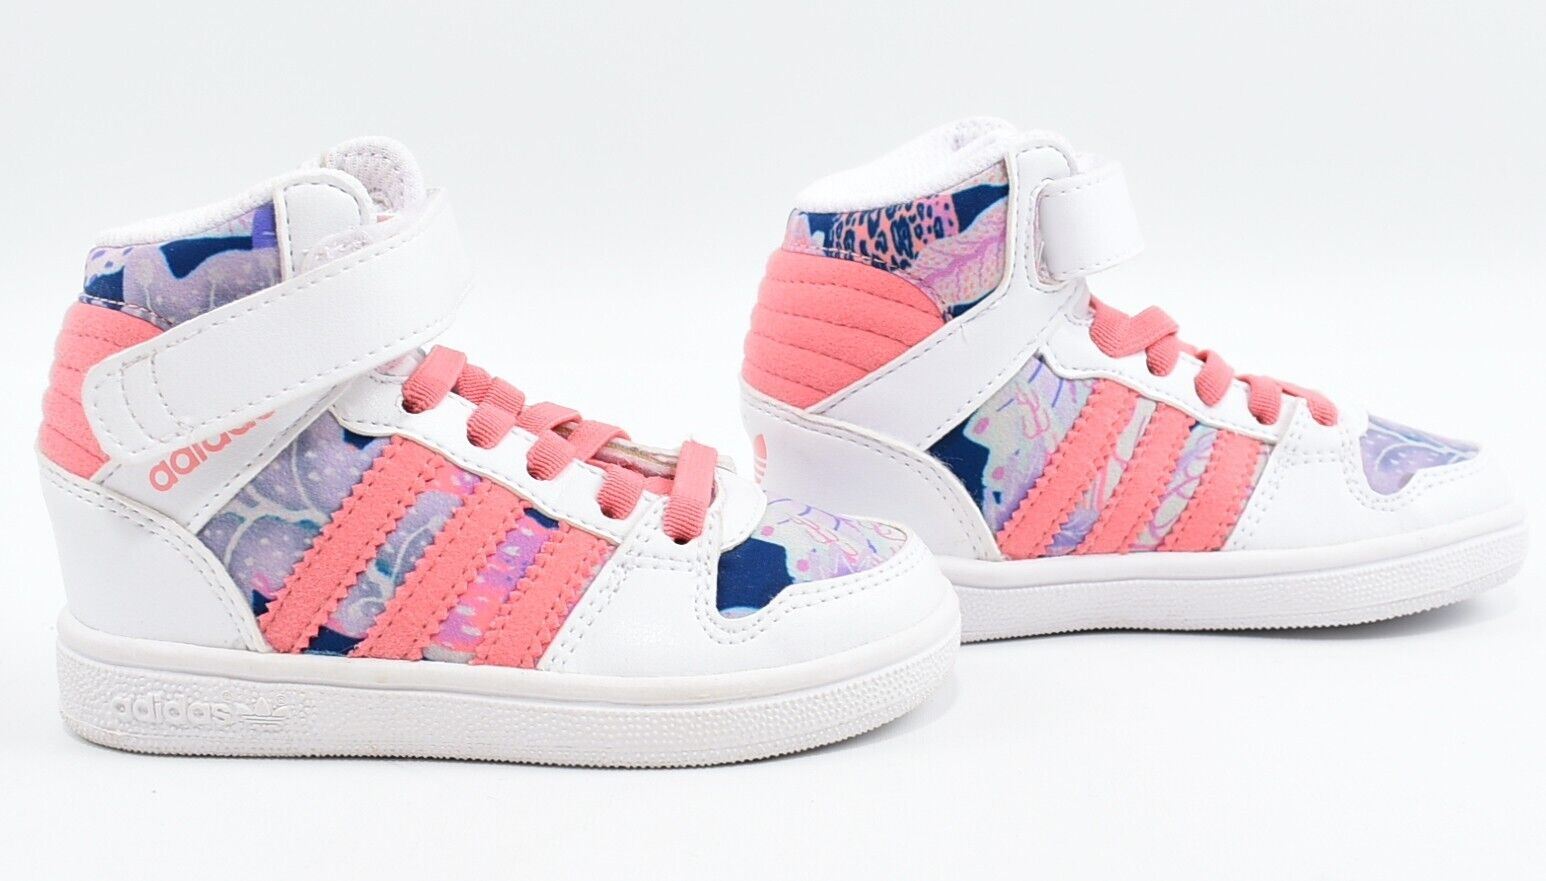 ADIDAS Girls' PROP PLAY 2 High Top Trainers, White-Pink, size infant UK 5 /EU 21